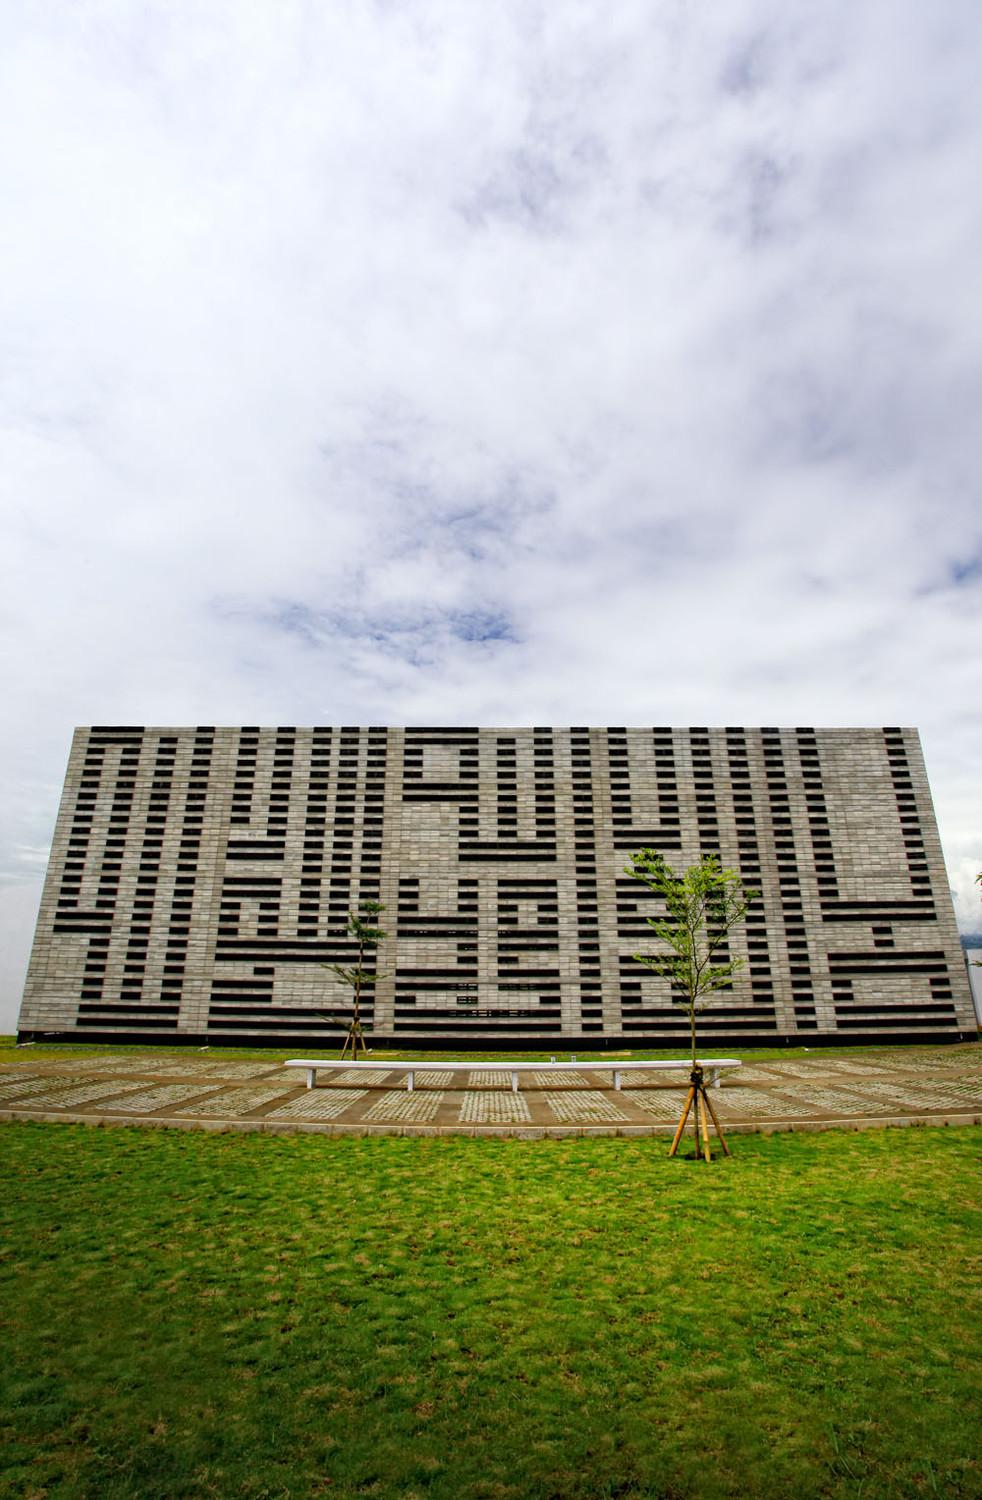 View of a calligraphic facade from across the lawn